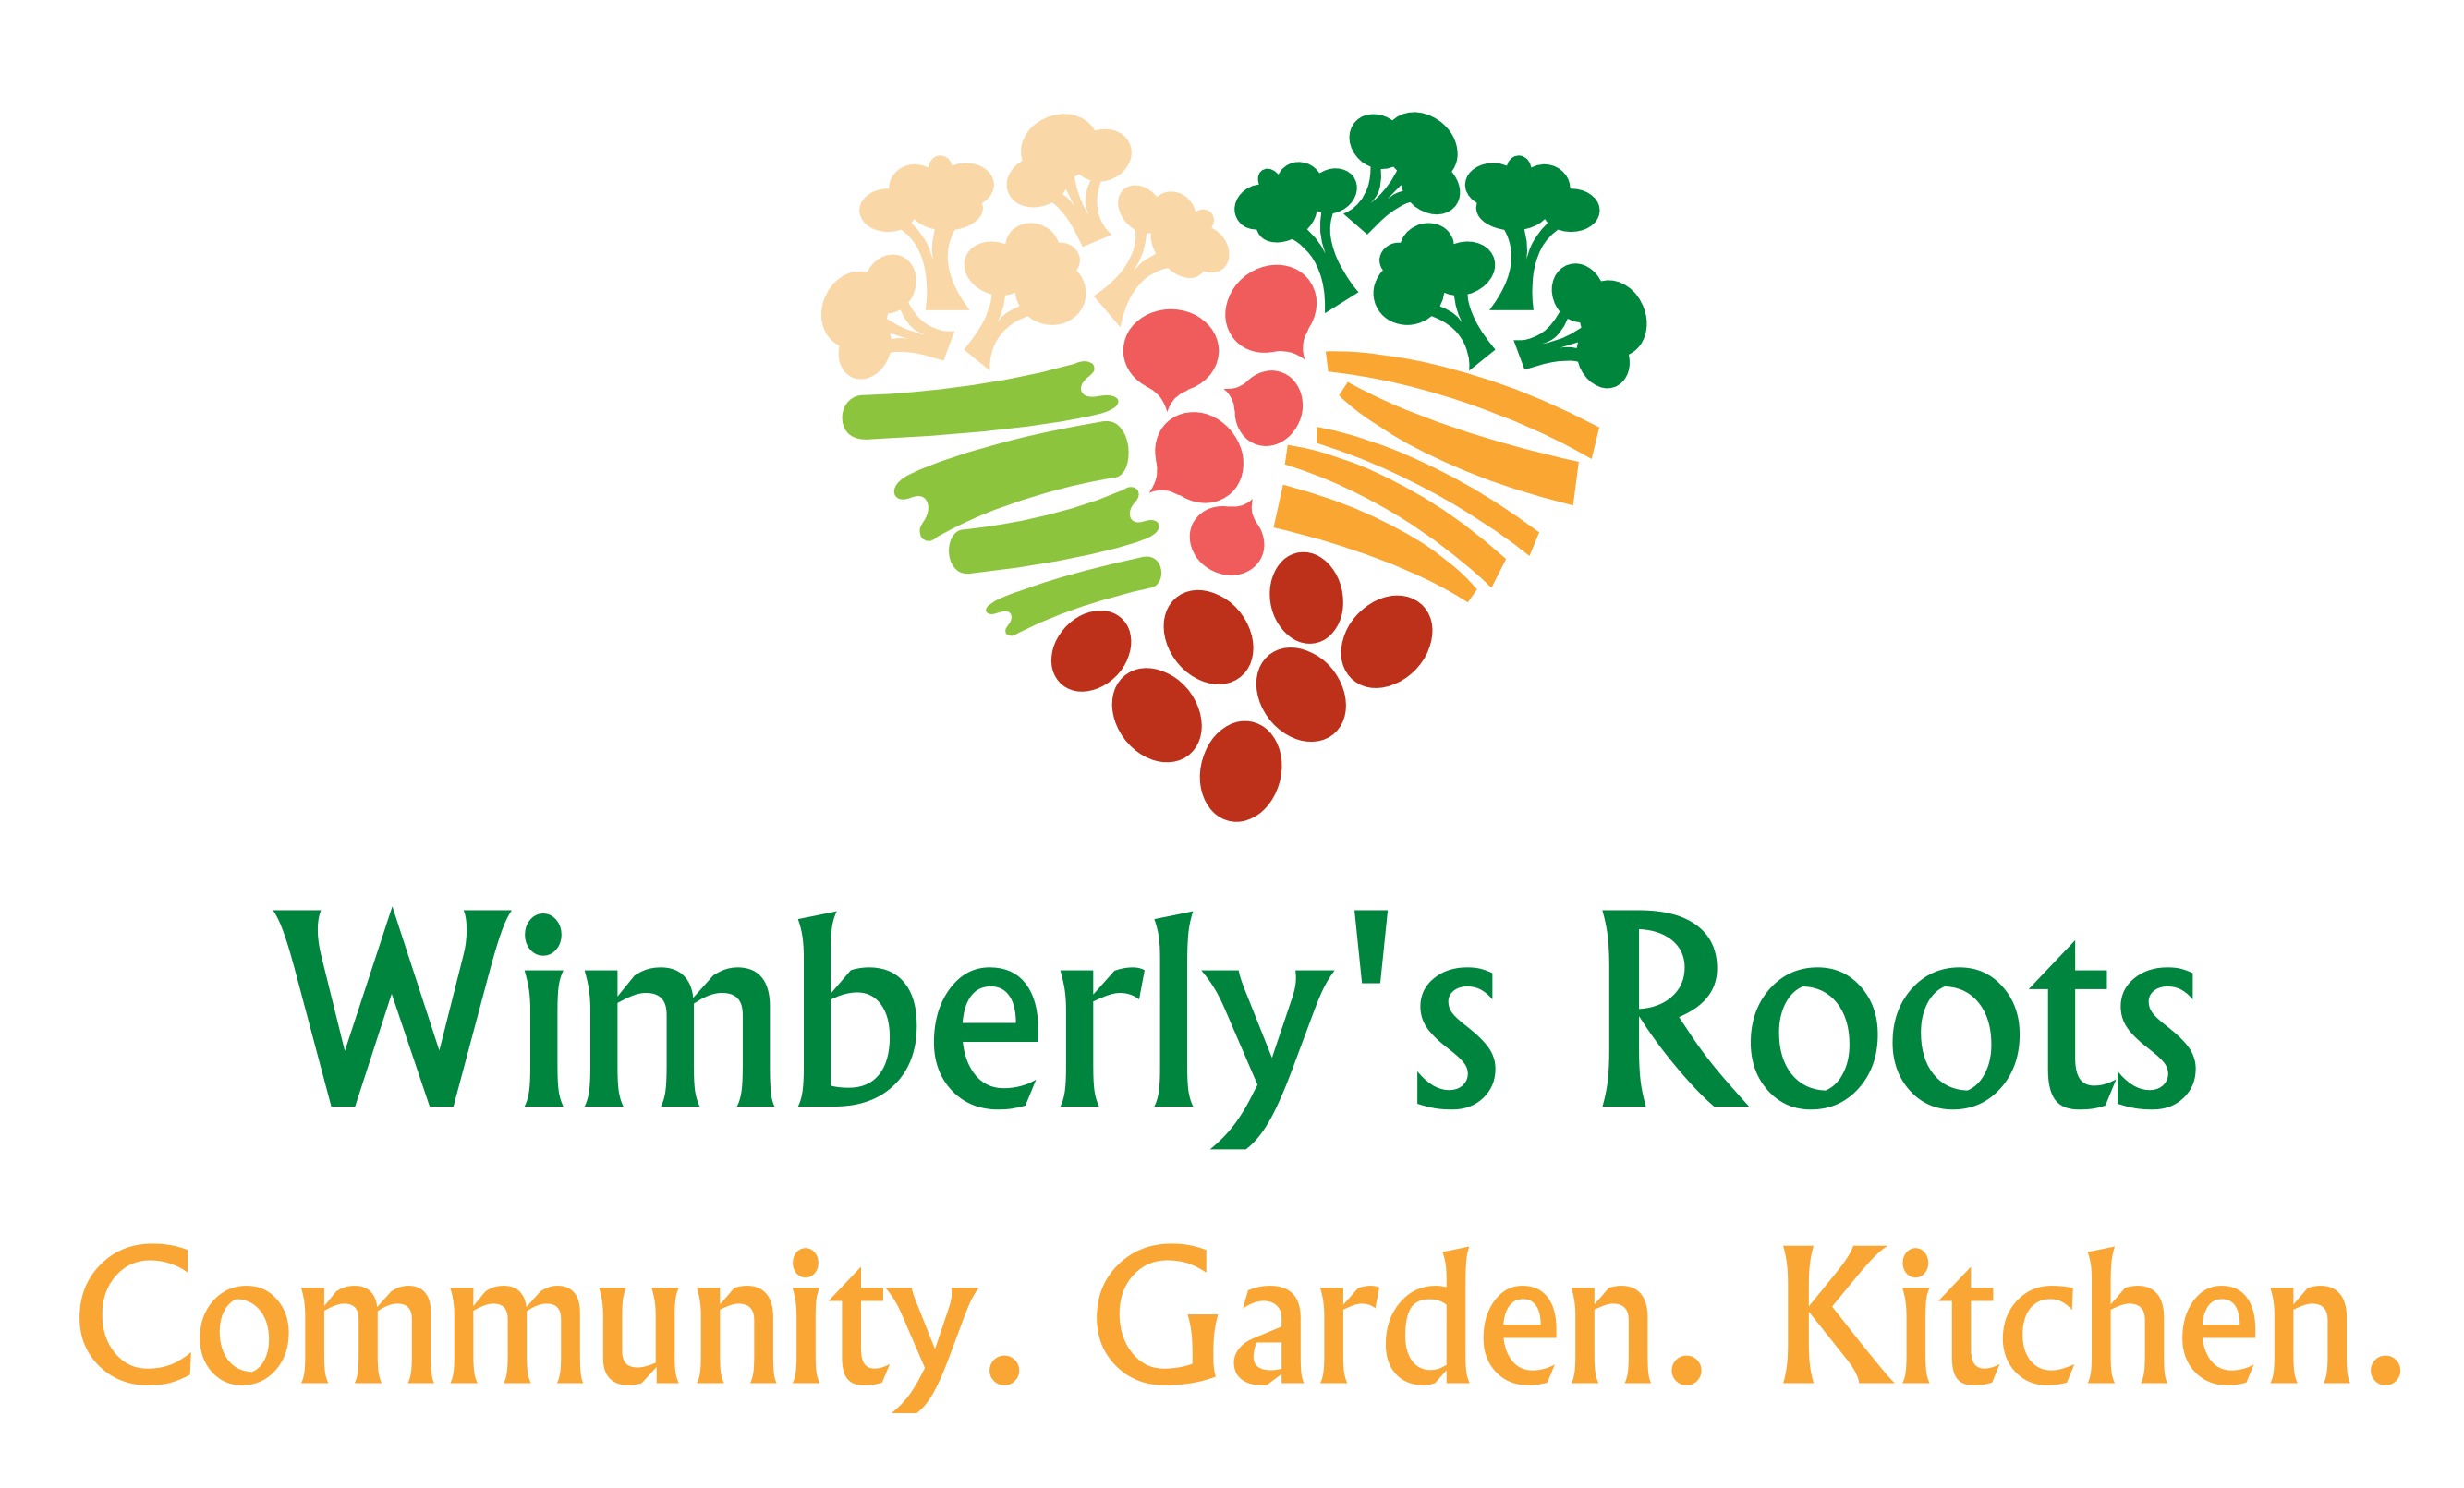 Wimberly's Roots logo